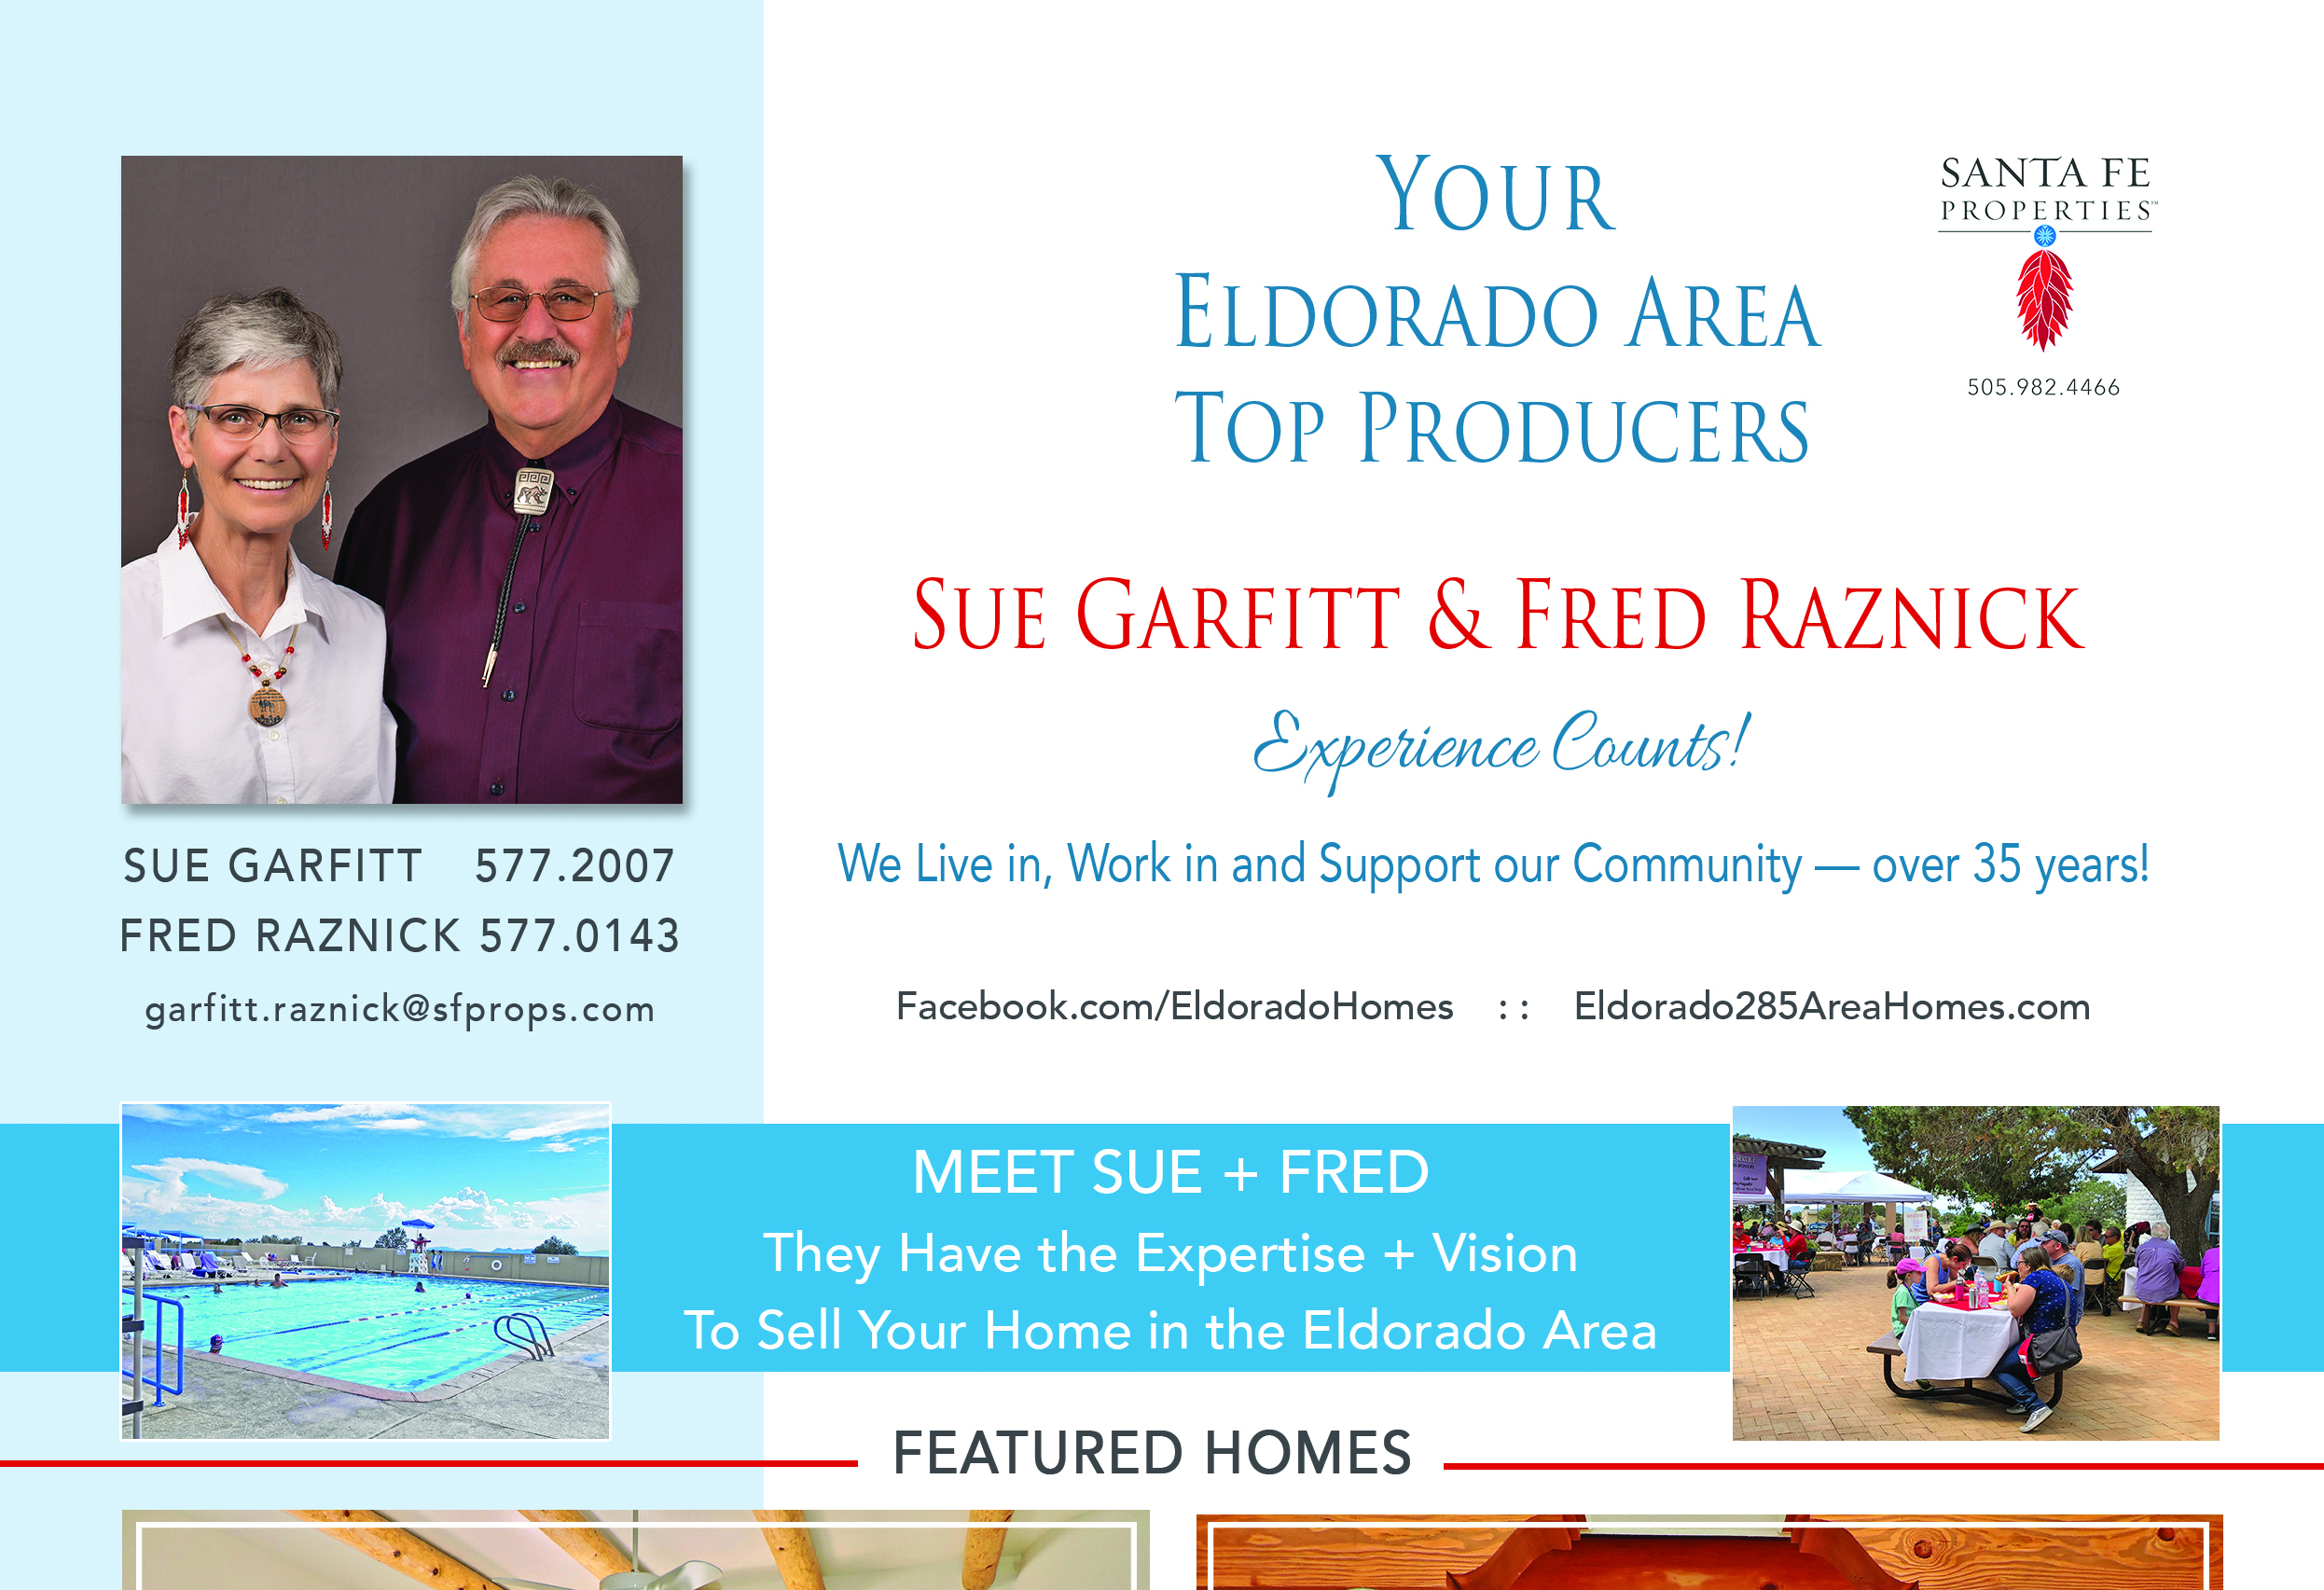 Look for our ad in the September issue of Eldorado Living